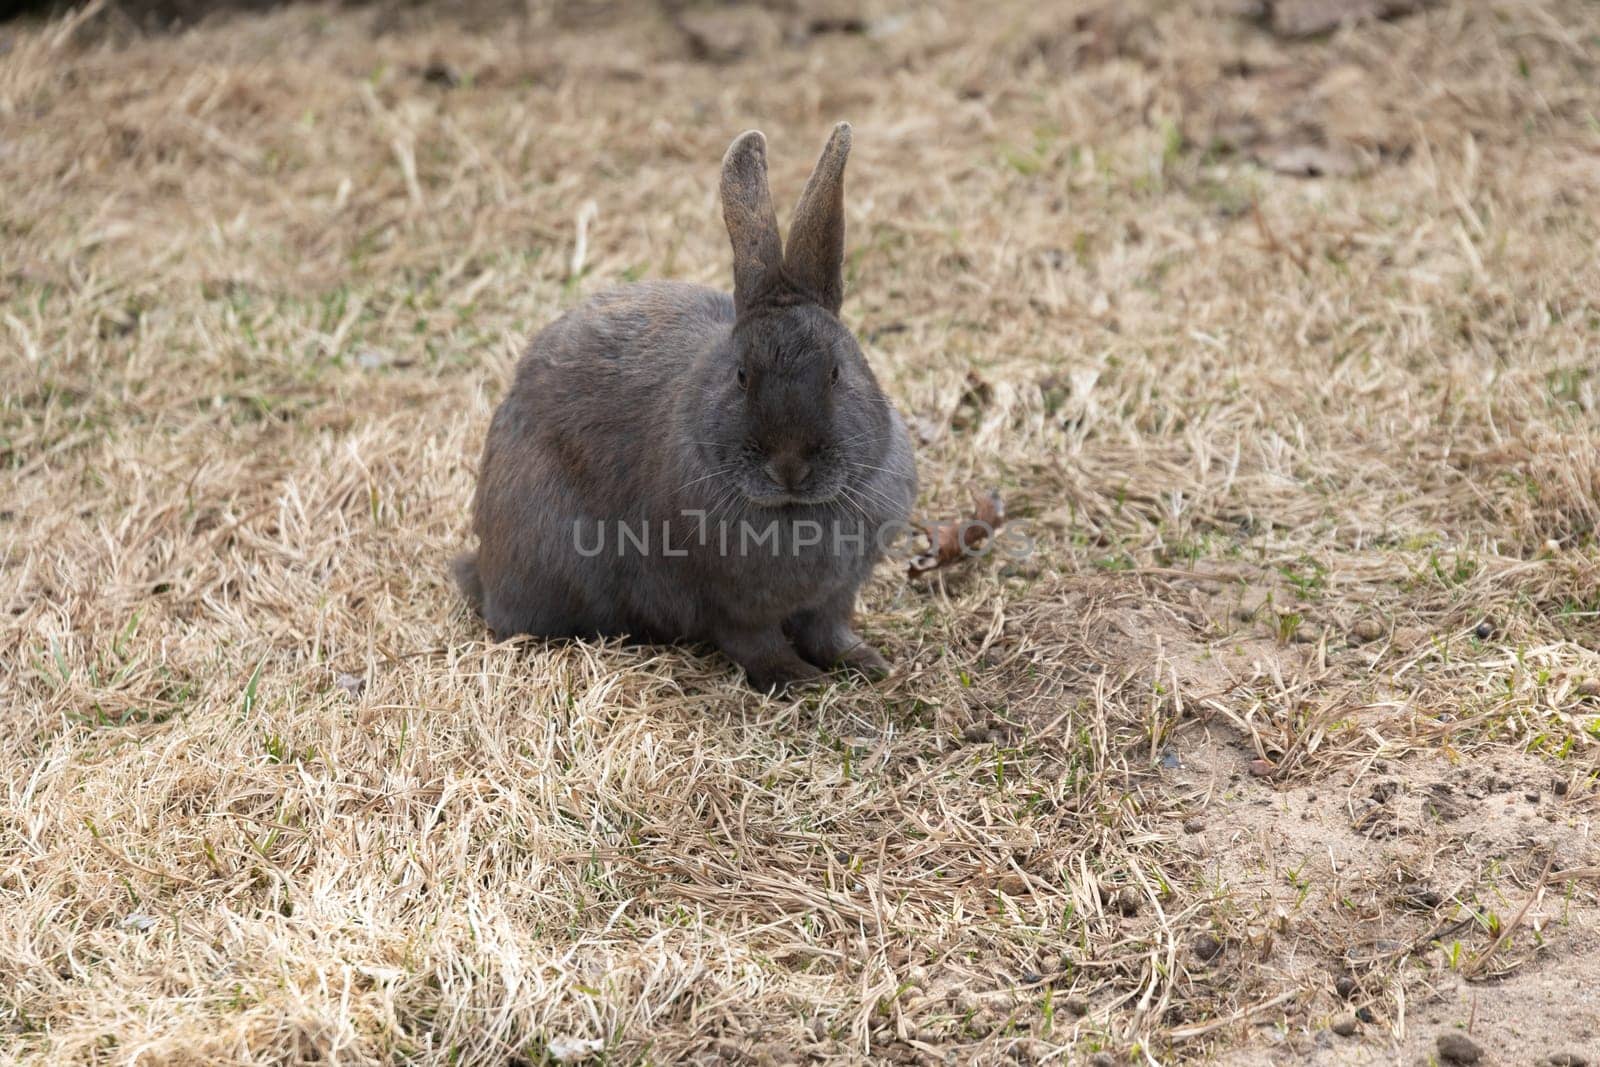 A gray rabbit is perched on top of a dry grass field. The rabbit is calmly sitting, blending in with the muted tones of the surroundings.